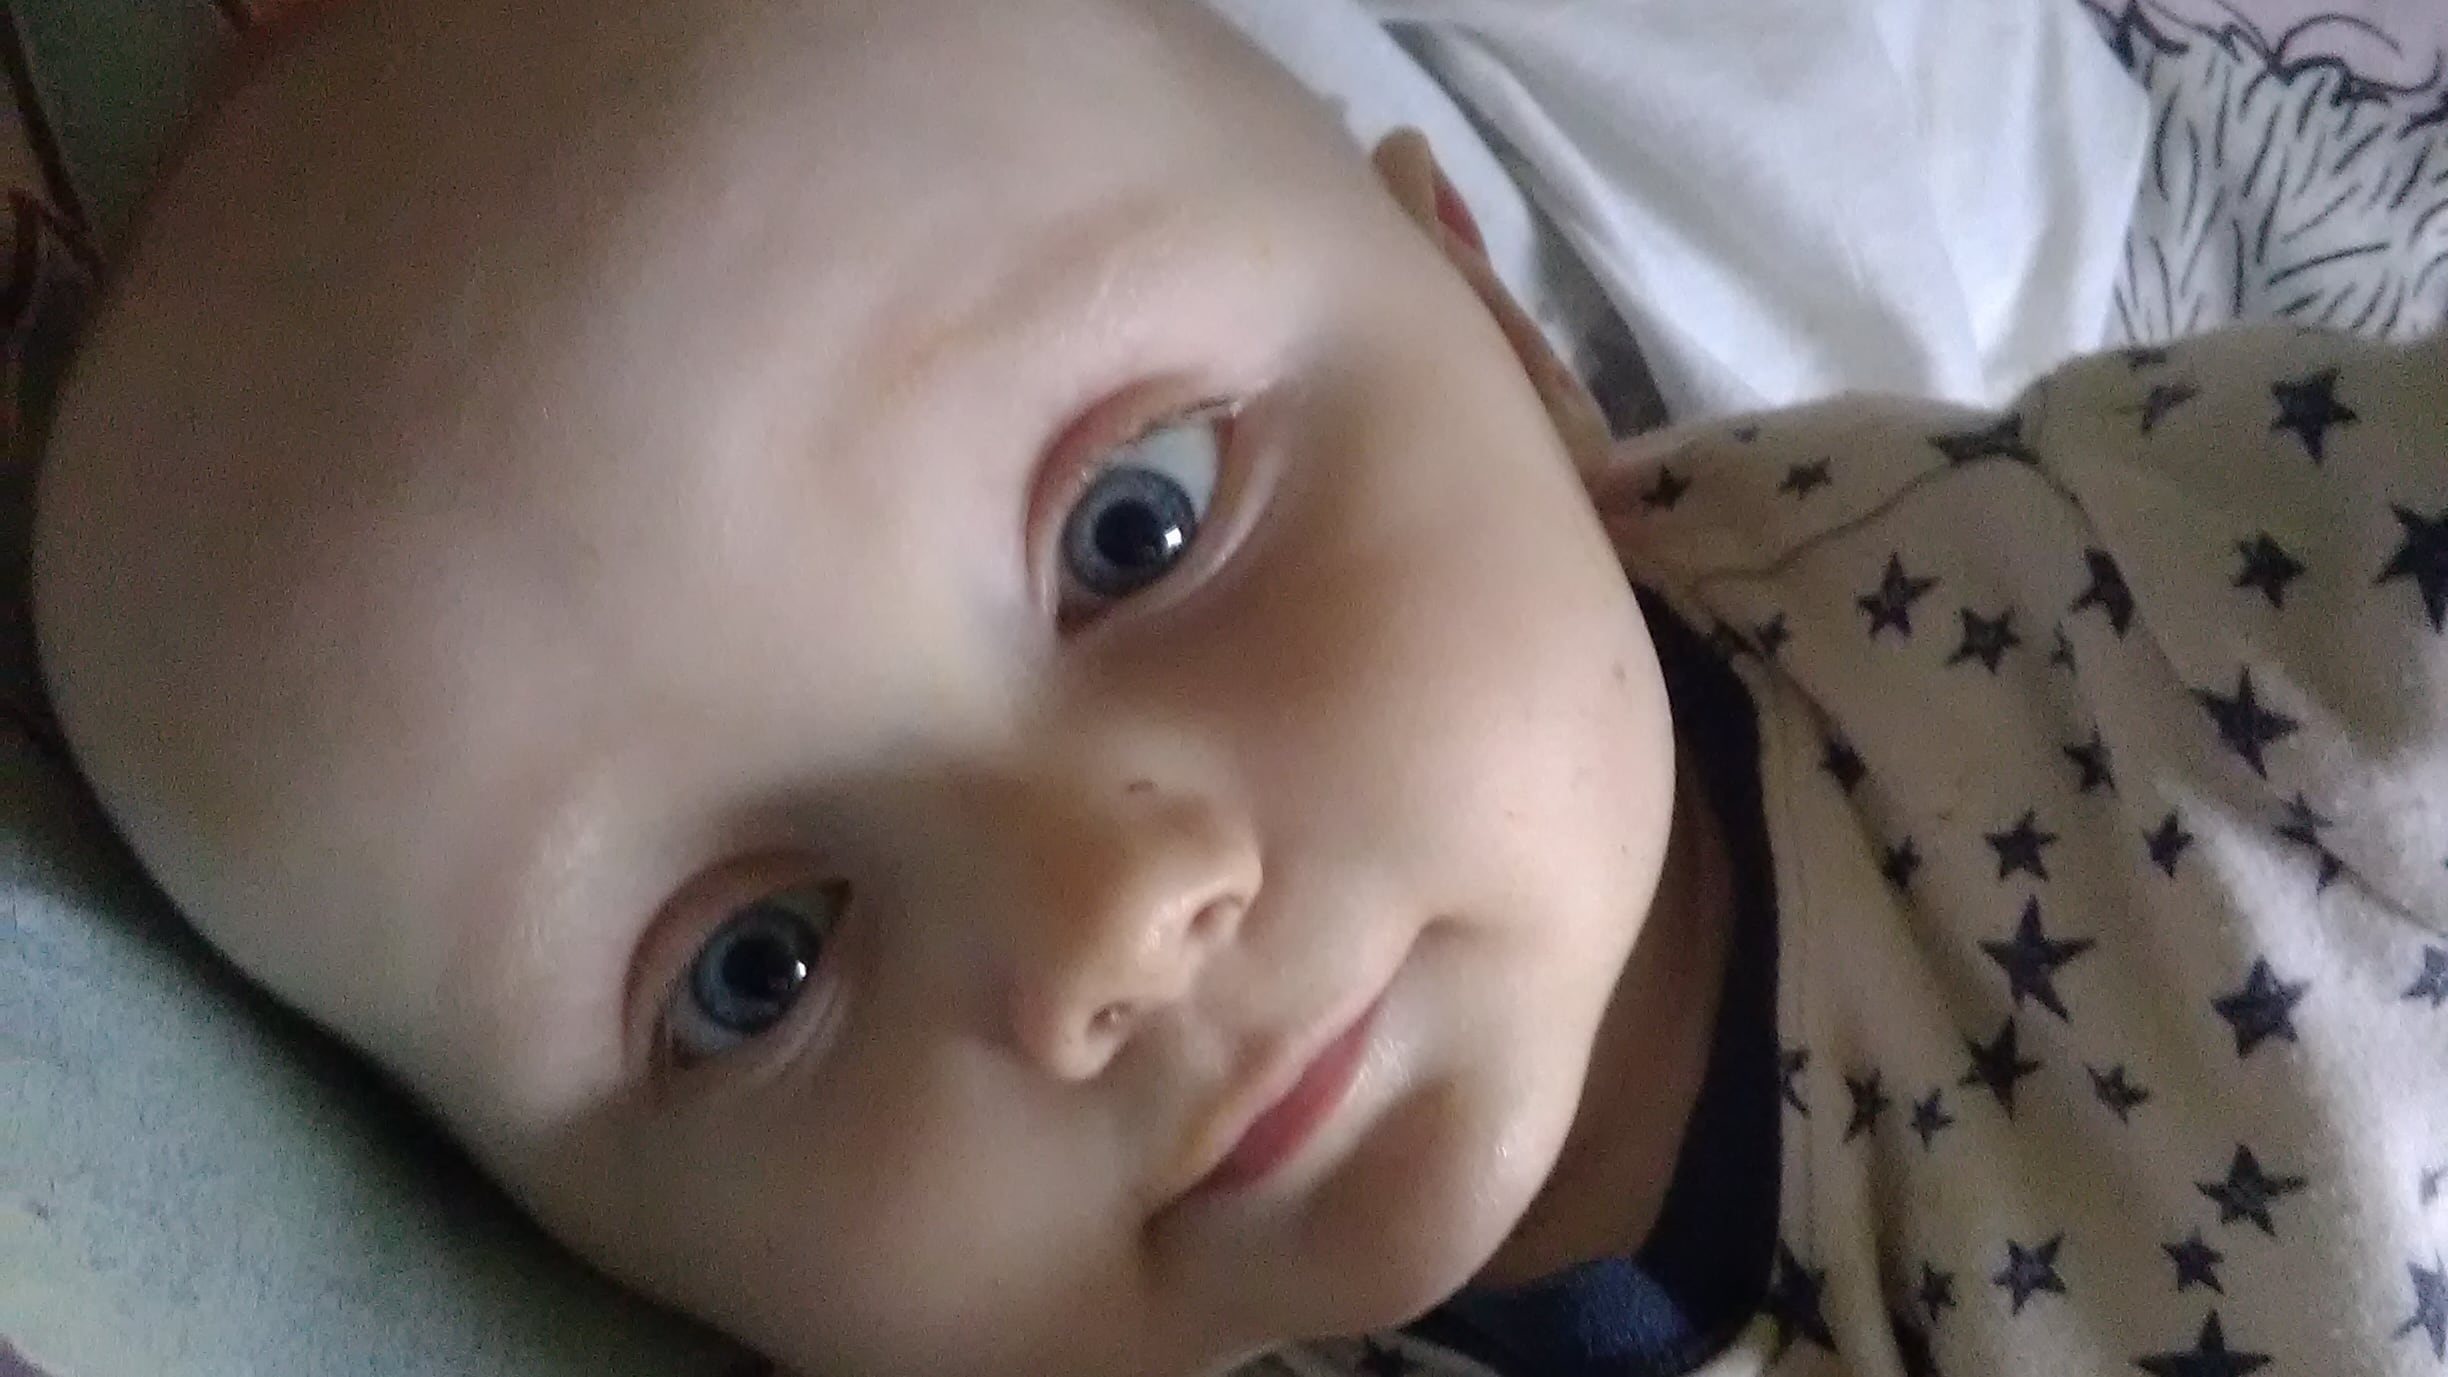 Ten-month-old Finley Boden was murdered just weeks after he was returned to his parents’ care in 2020